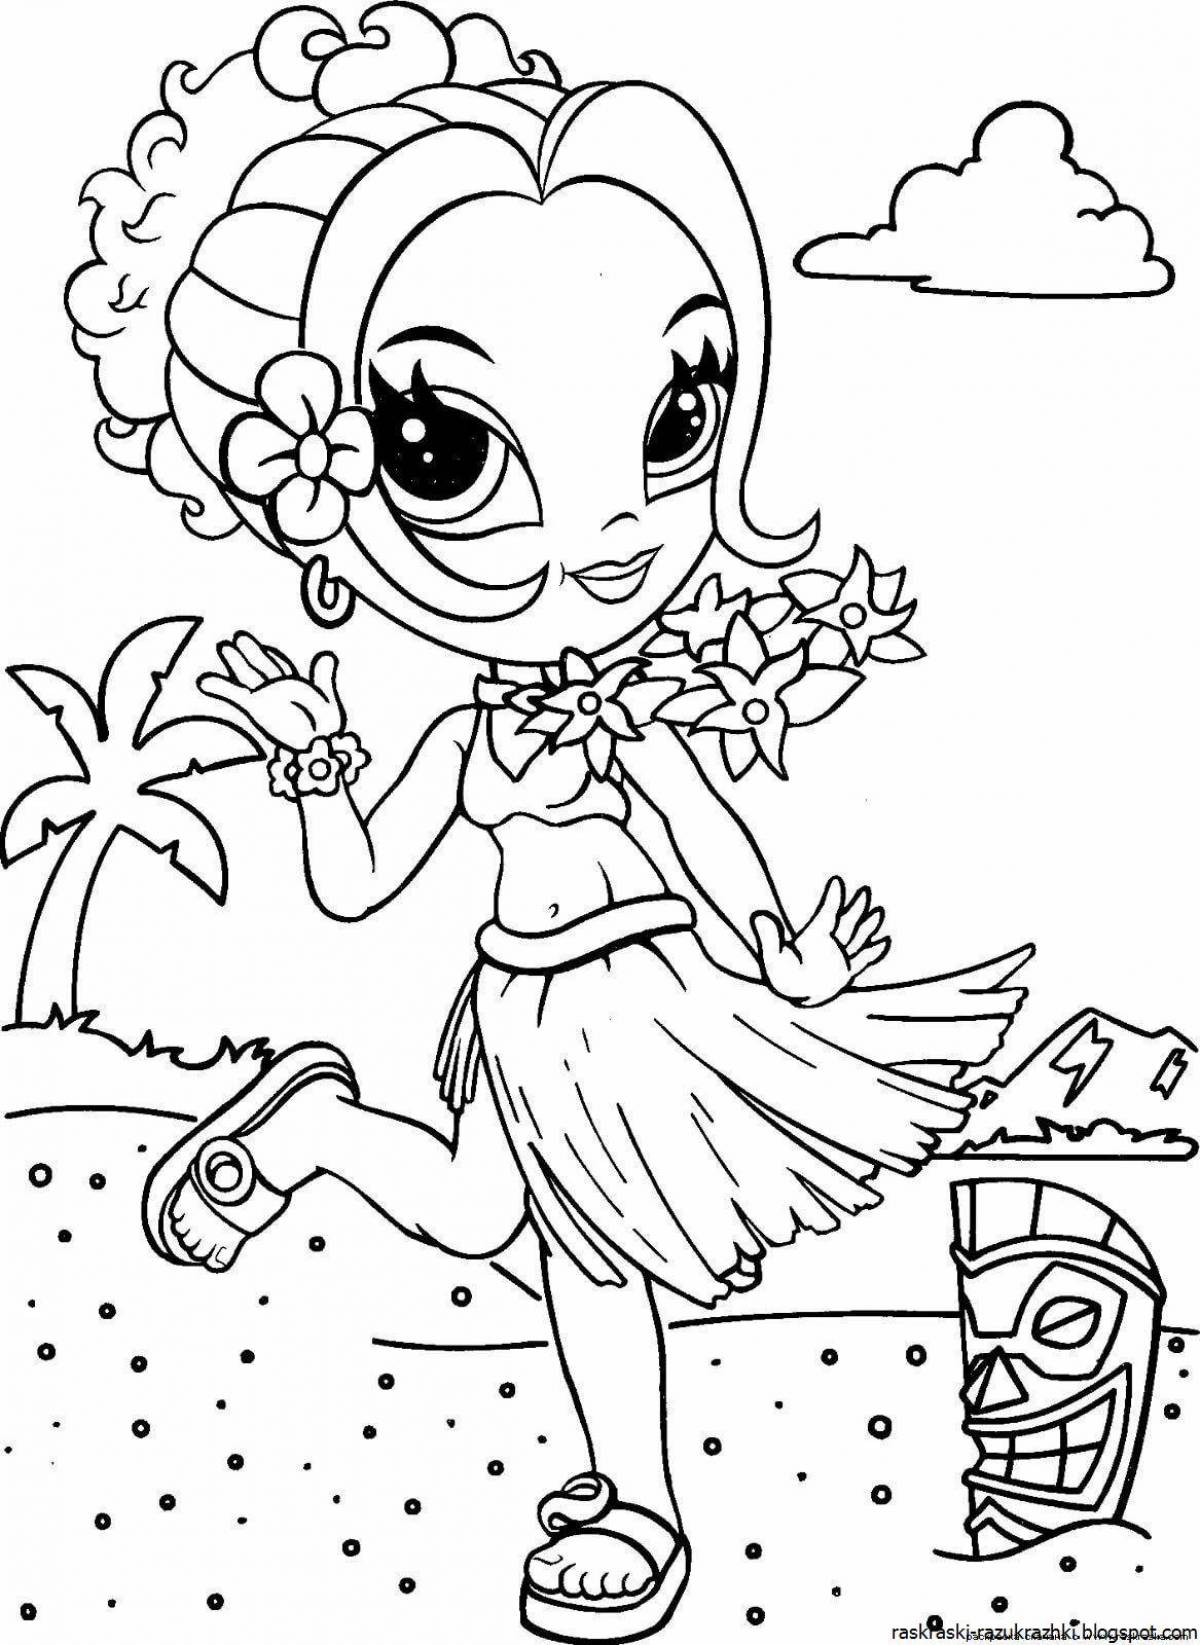 Colorful fancy coloring book for free